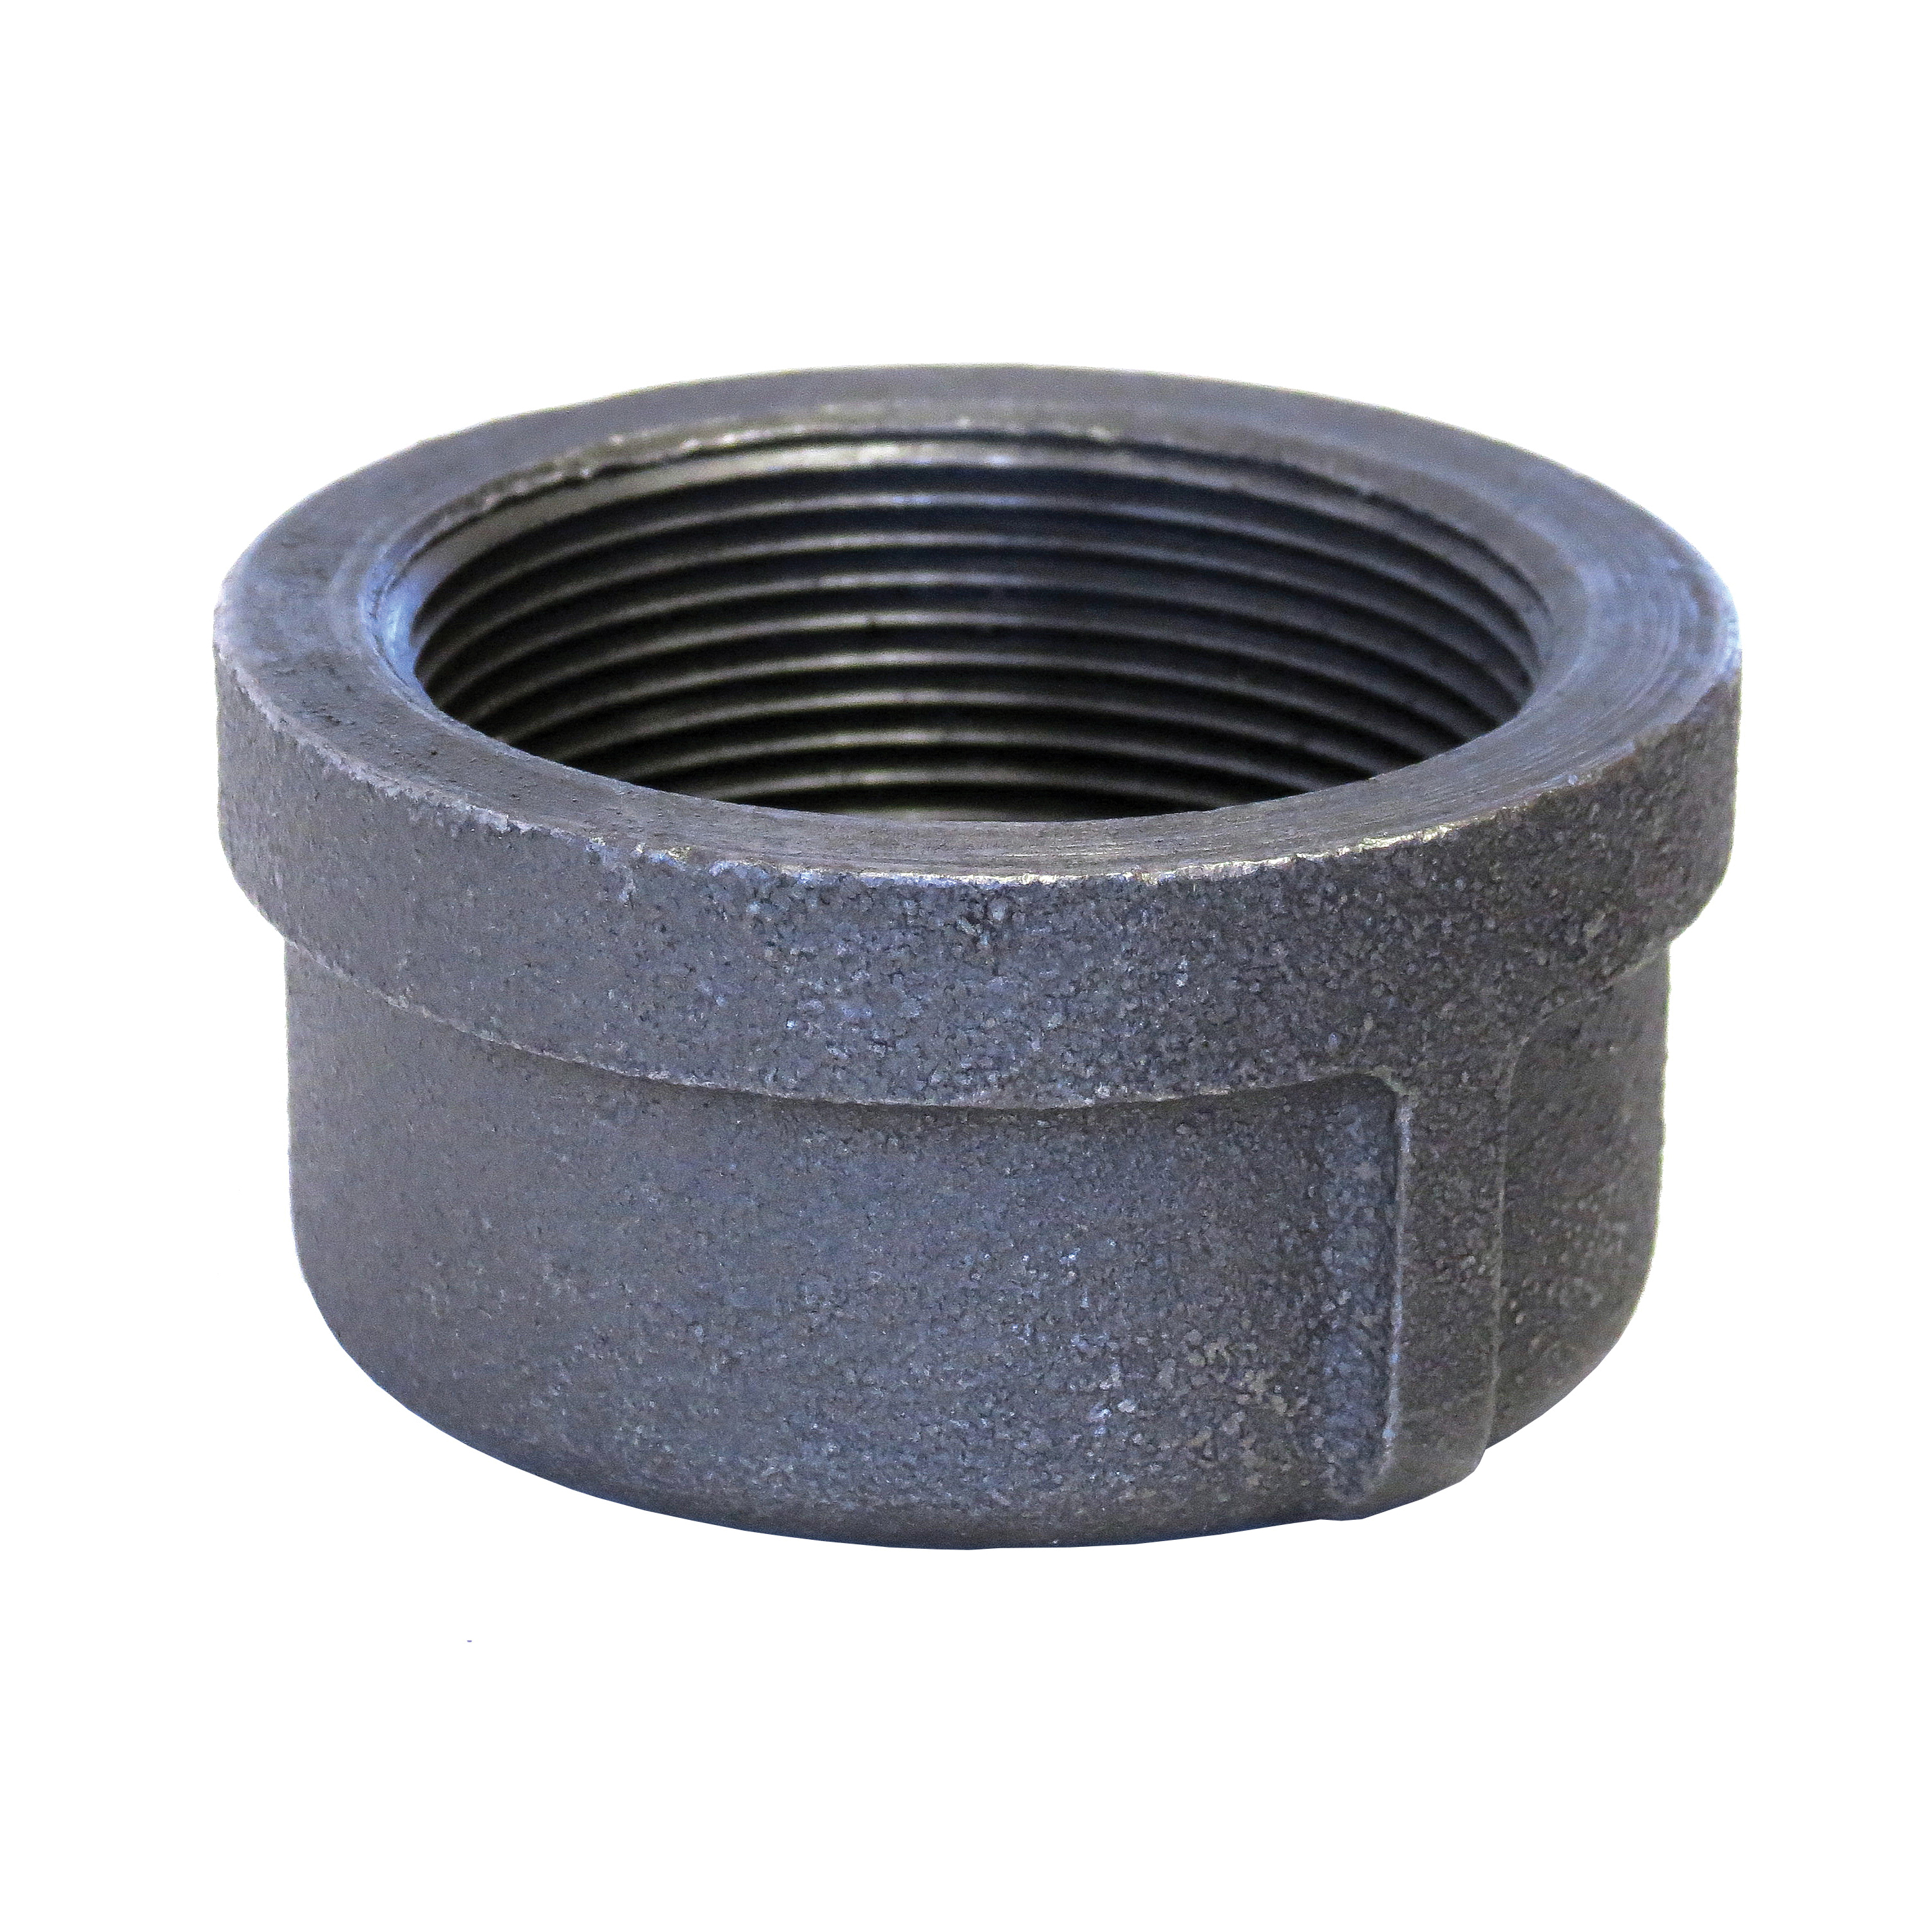 Anvil® 0318900602 FIG 1124 Standard Pipe Cap, 1 in Nominal, FNPT End Style, 150 lb, Malleable Iron, Black Oxide, Domestic